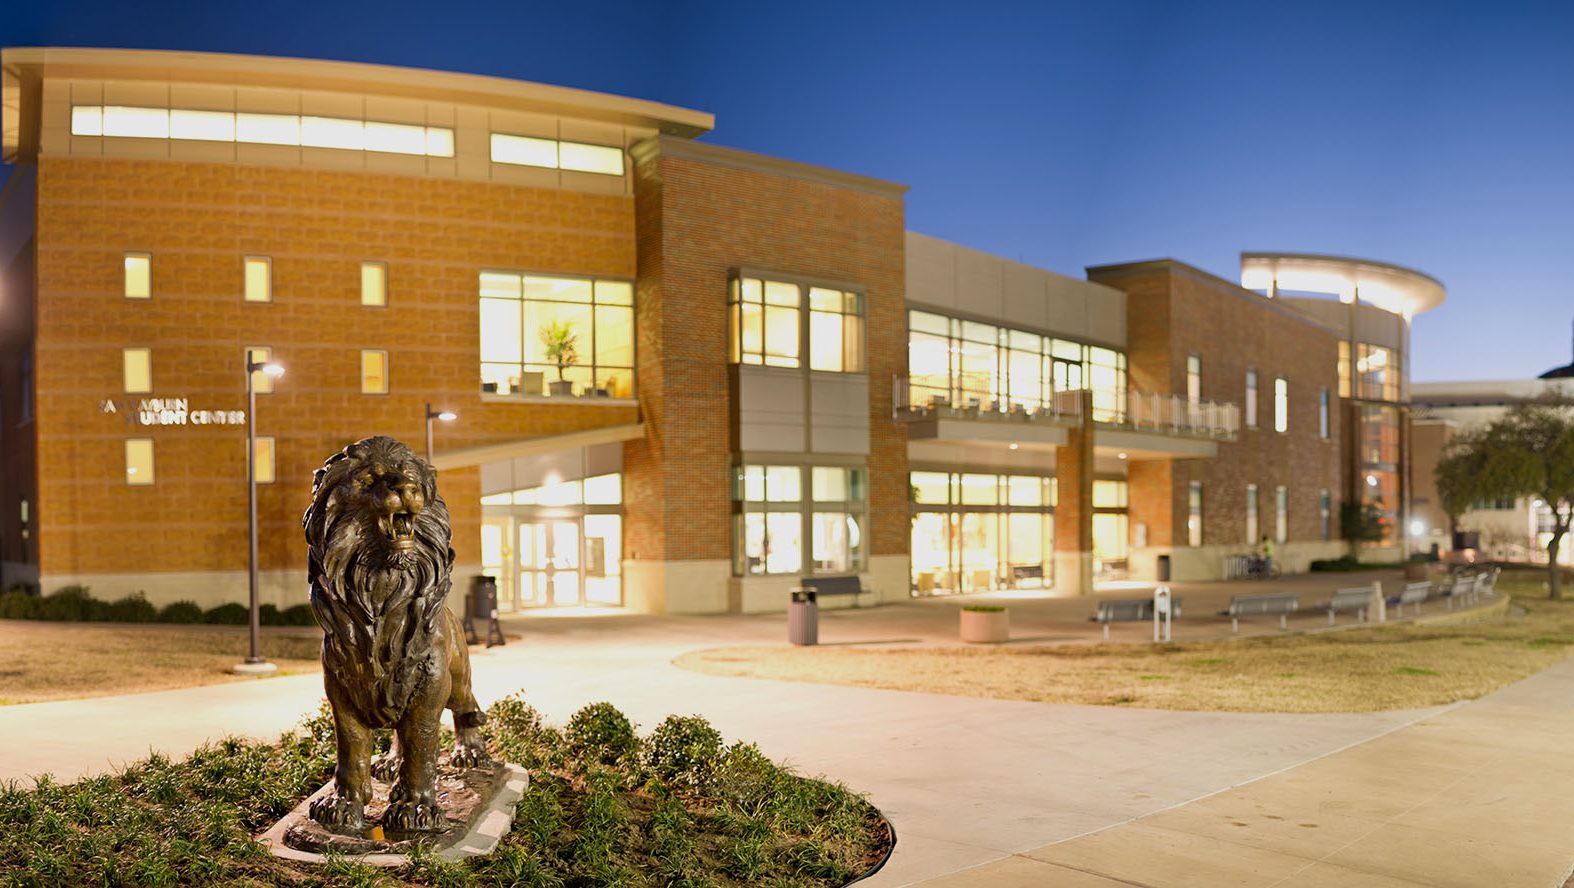 The new lion statue in front of the Rayburn Student center.